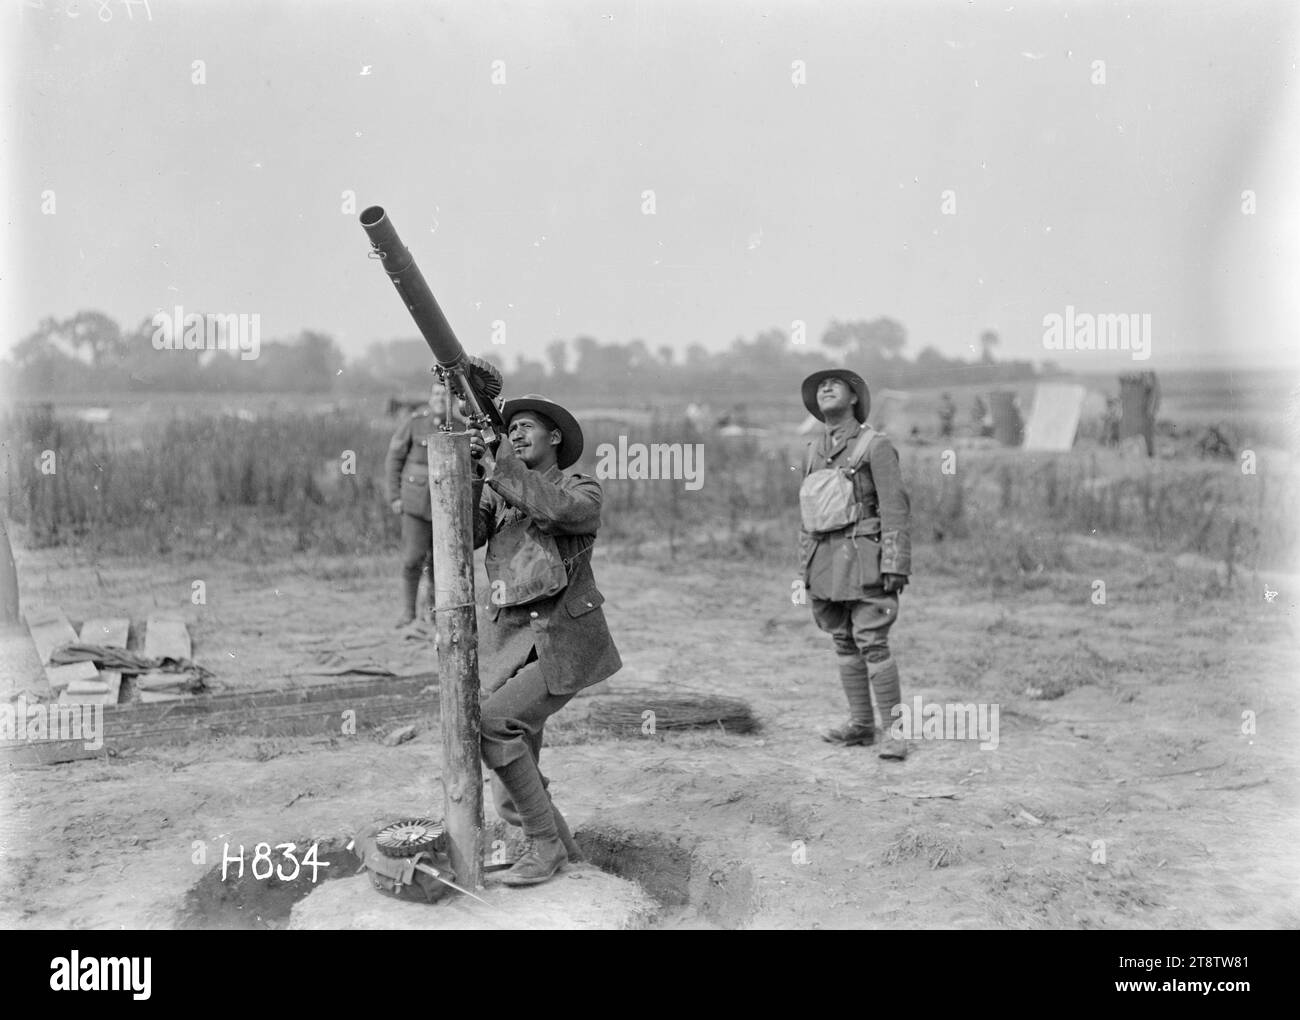 Soldiers on the anti-aircraft guard of the New Zealand Pioneer Maori Battalion camp, Bayencourt, France, Members of the New Zealand Pioneer Maori Battalion manning the anti-aircraft station of the camp at Bayencourt, during World War I. Shows one soldier pointing an anti-aircraft gun towards the sky with two others standing behind him looking upwards. Photographed in 1918 Stock Photo